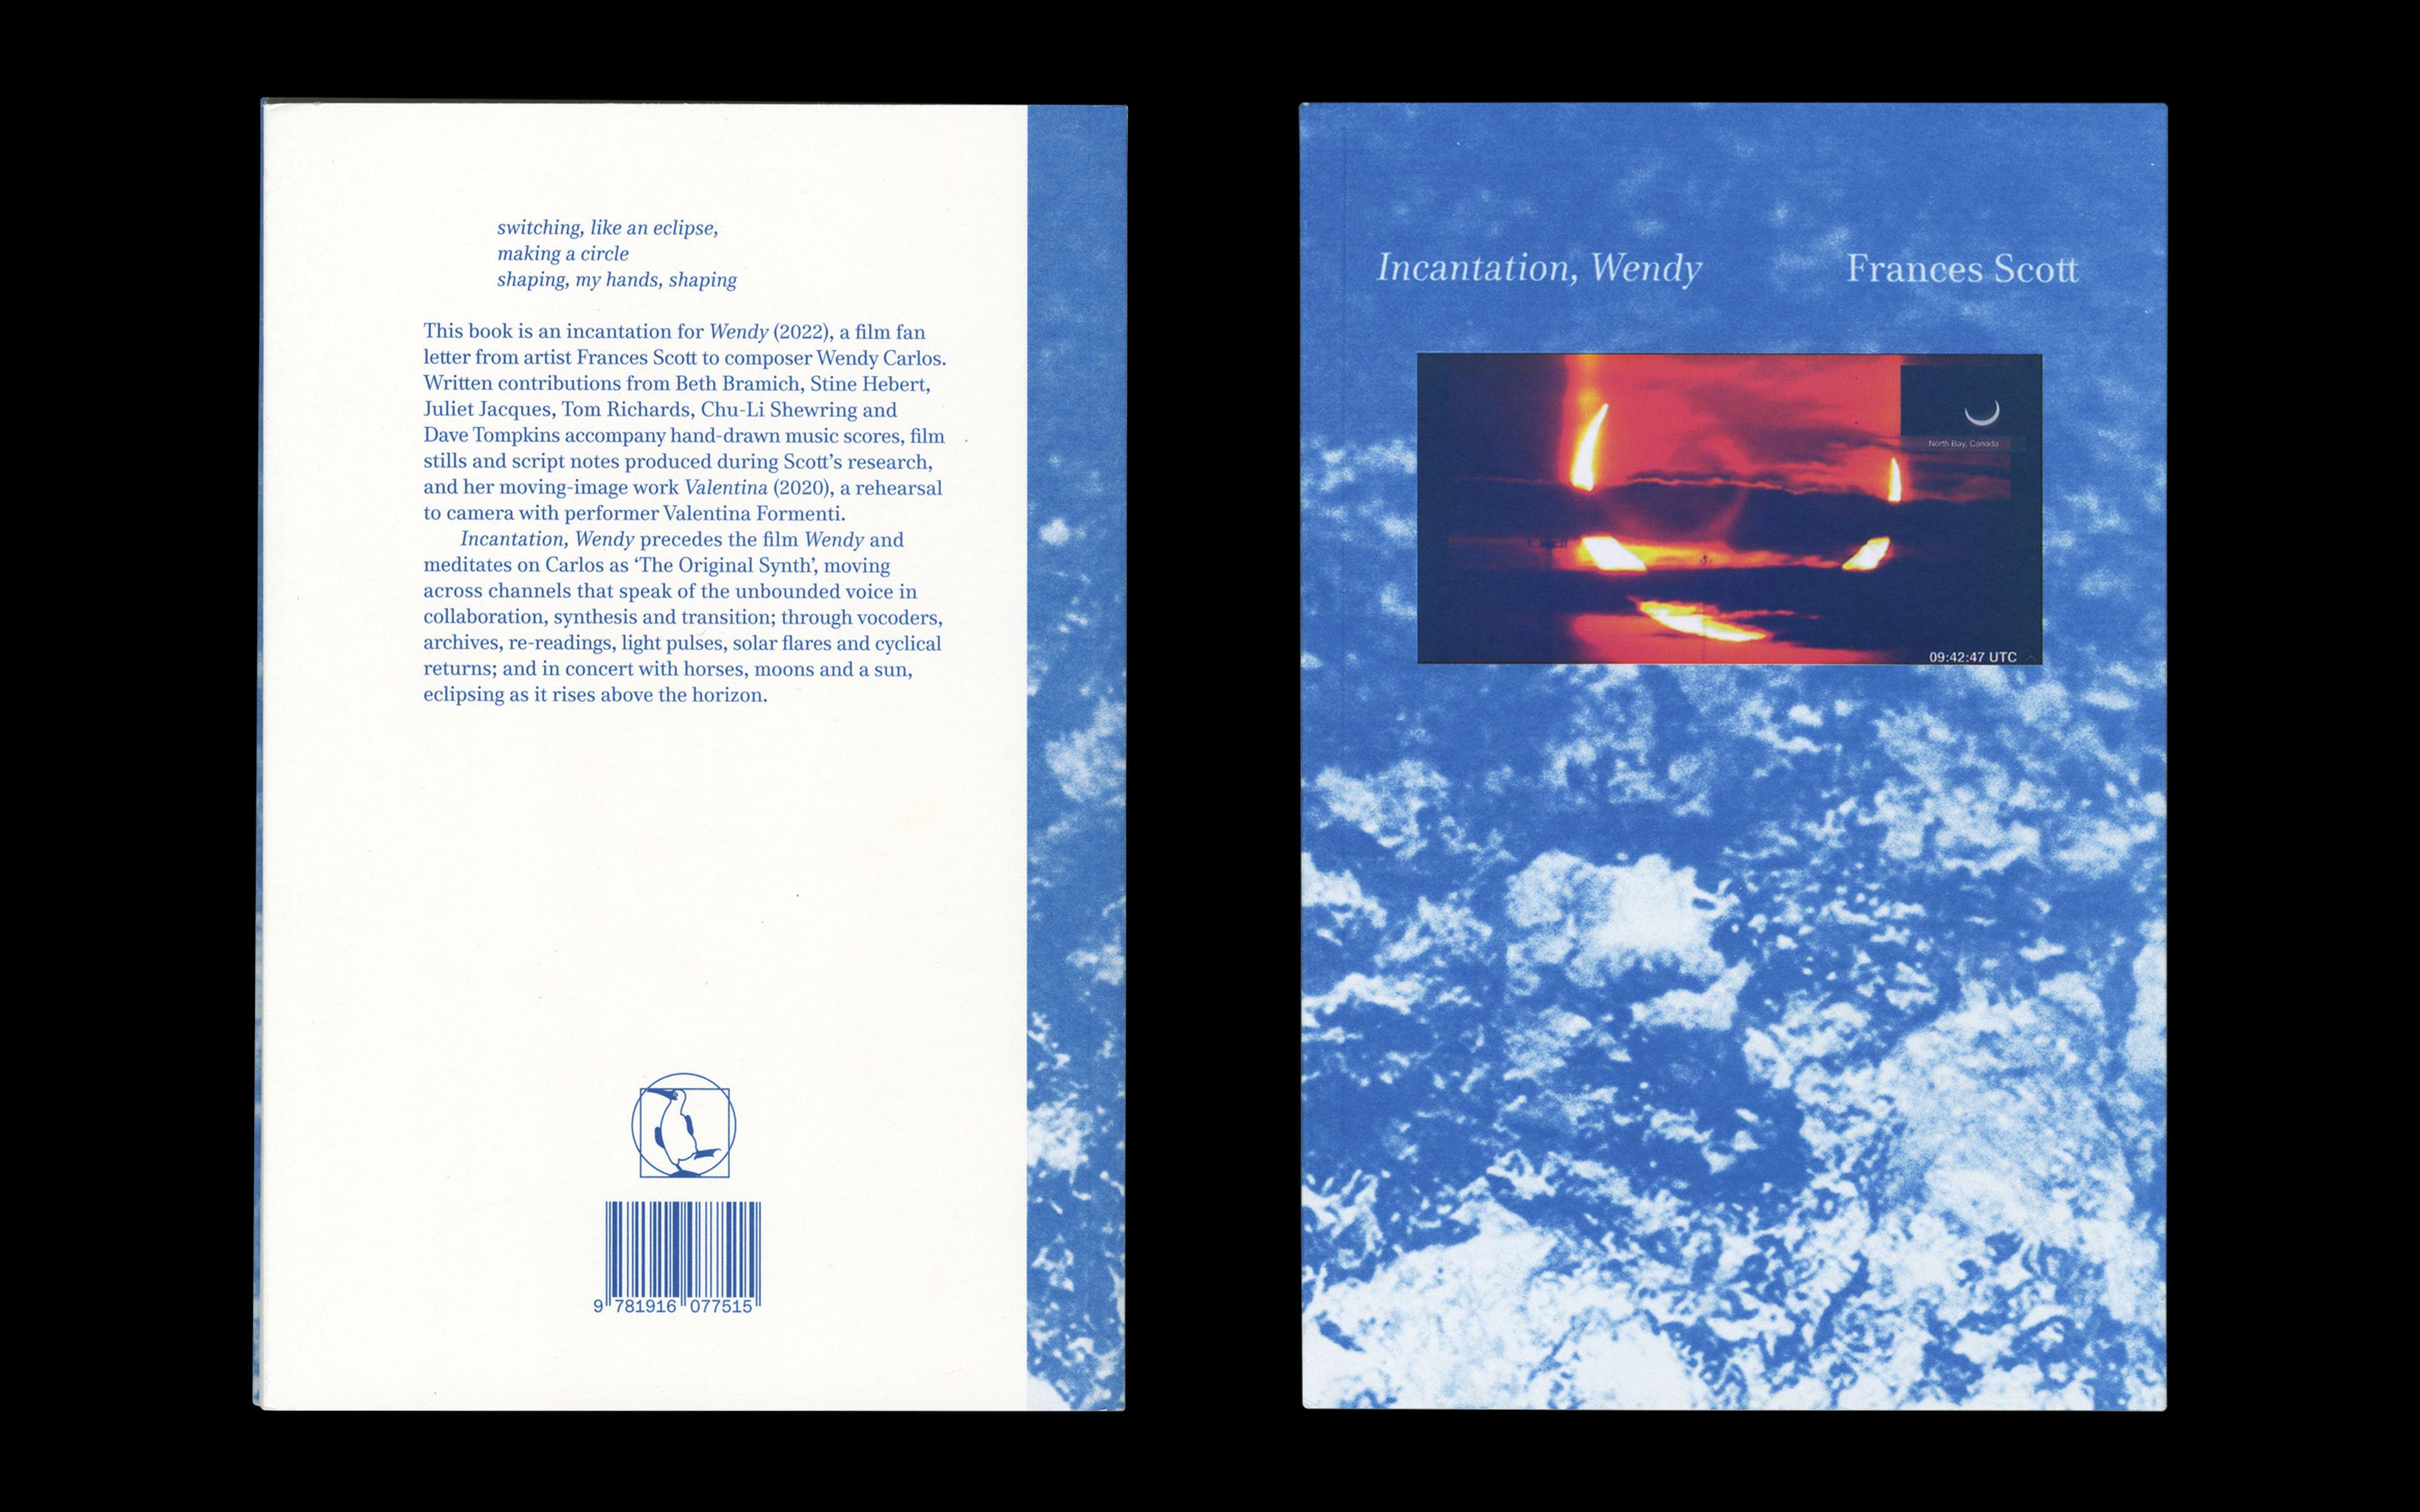 Scan of front and back cover of 'Incantation, Wendy' by Frances Scott